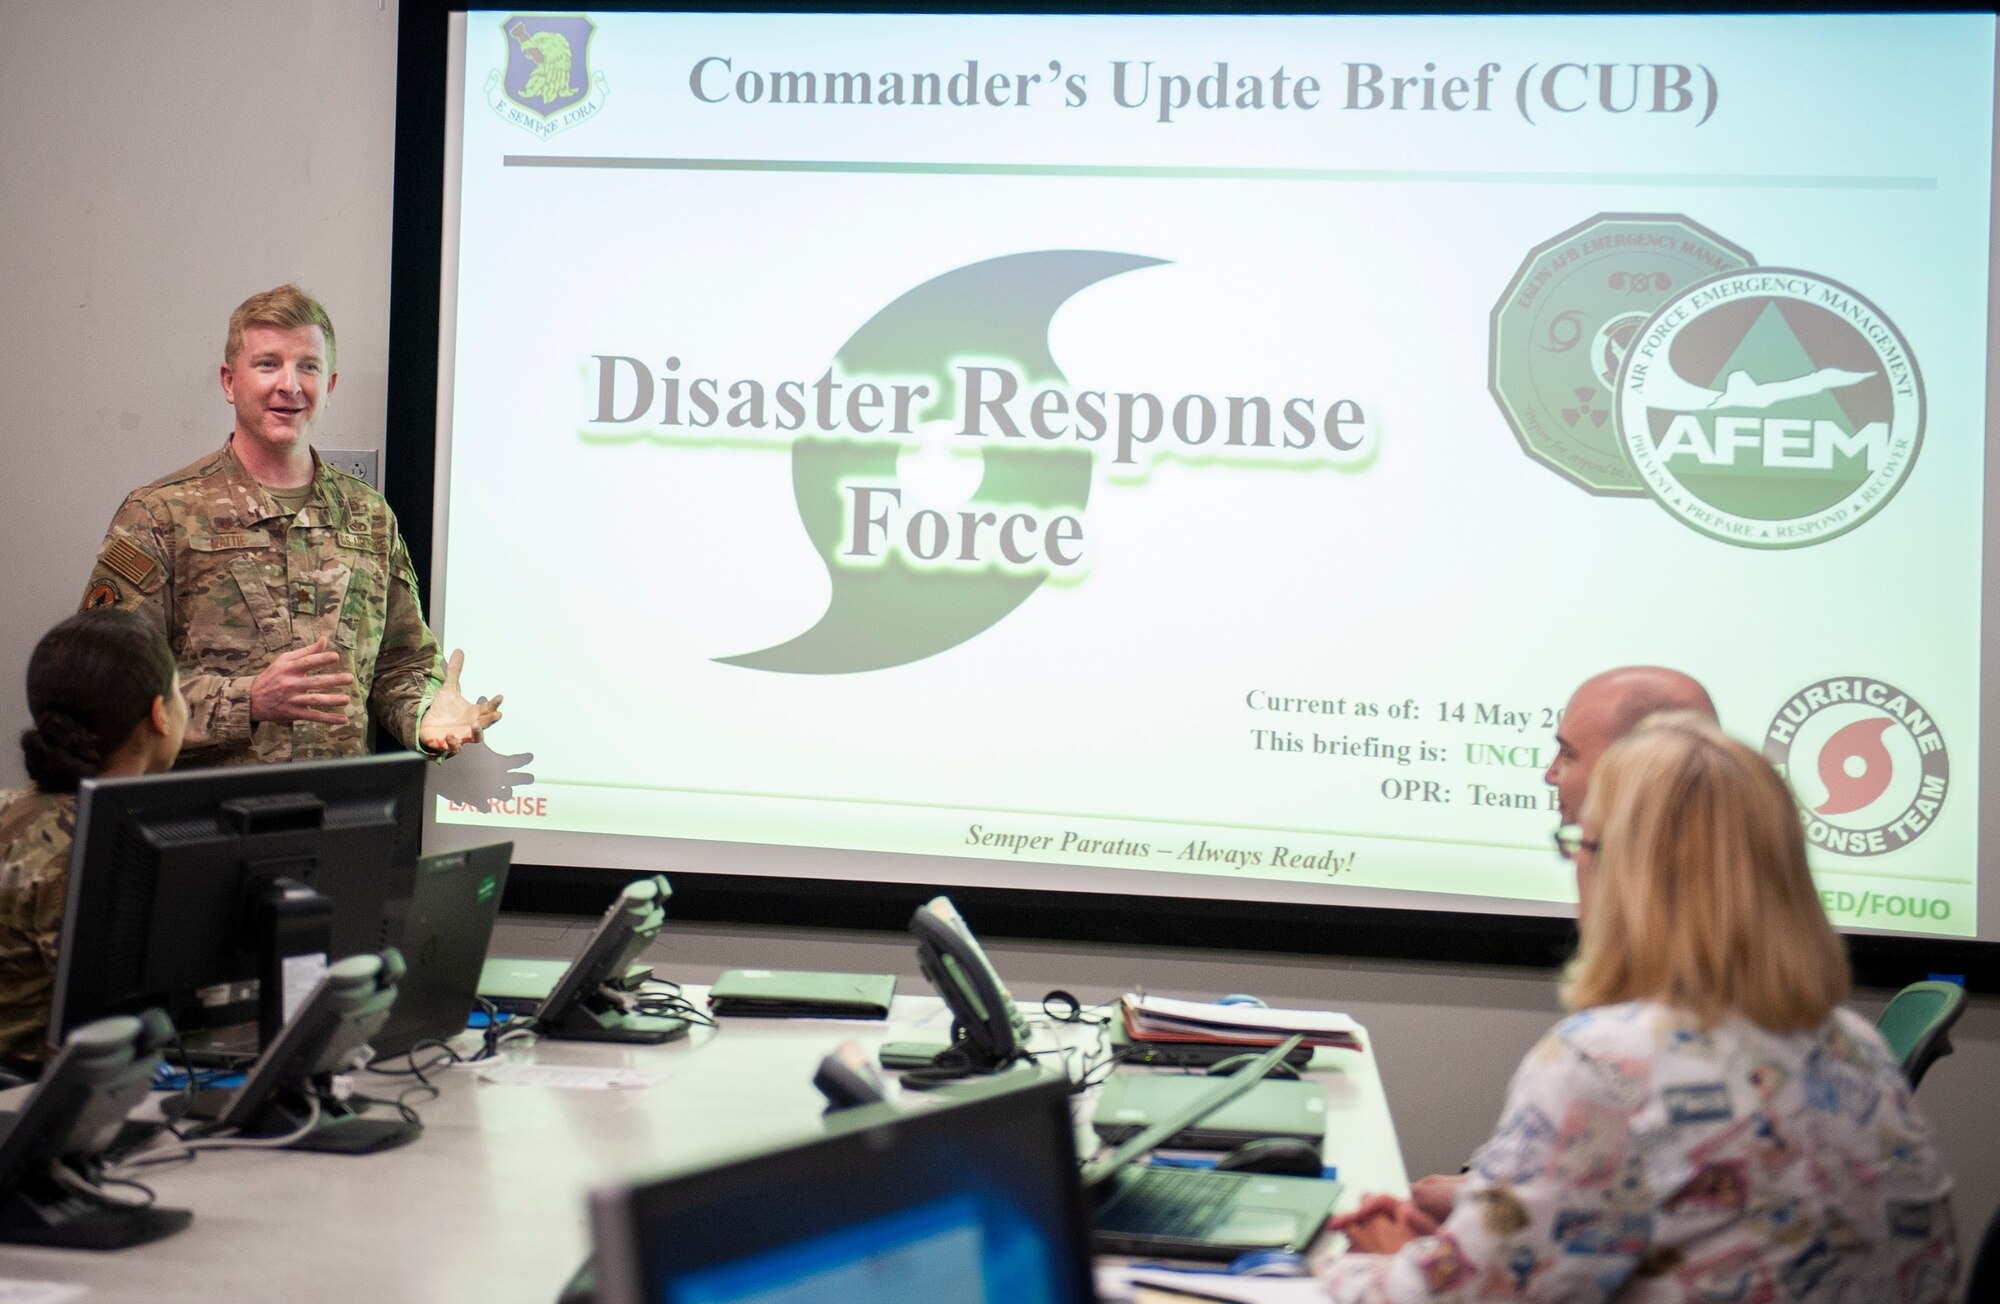 Eglin exercises hurricane ops under COVID-19 guidelines